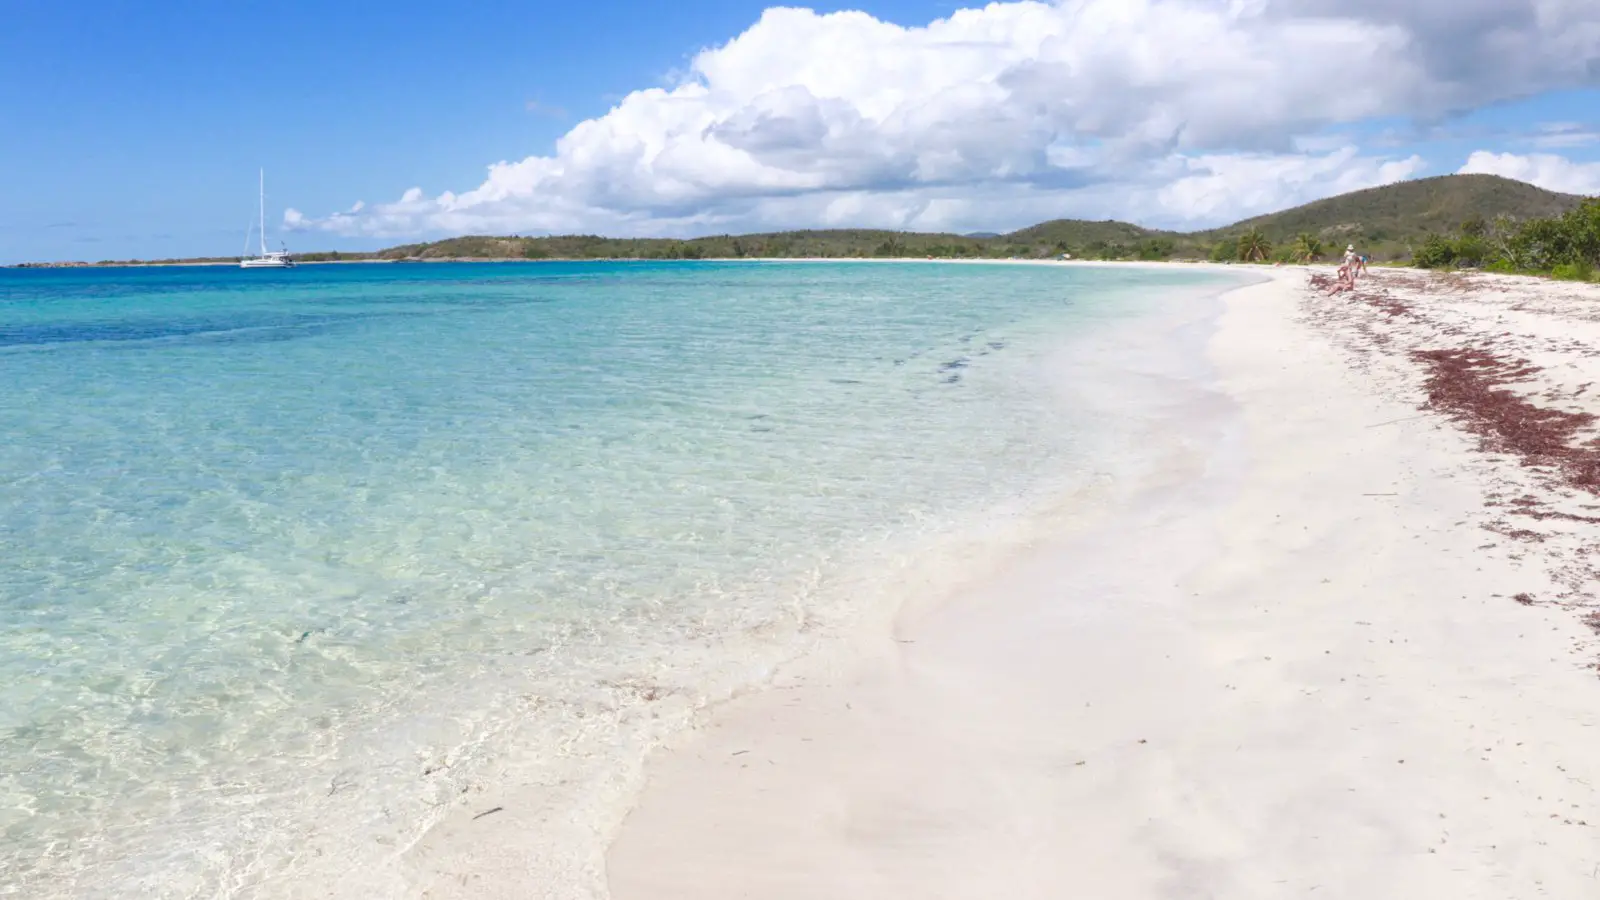 Calm, clear water and white sand on Playa La Chiva beach in Vieques